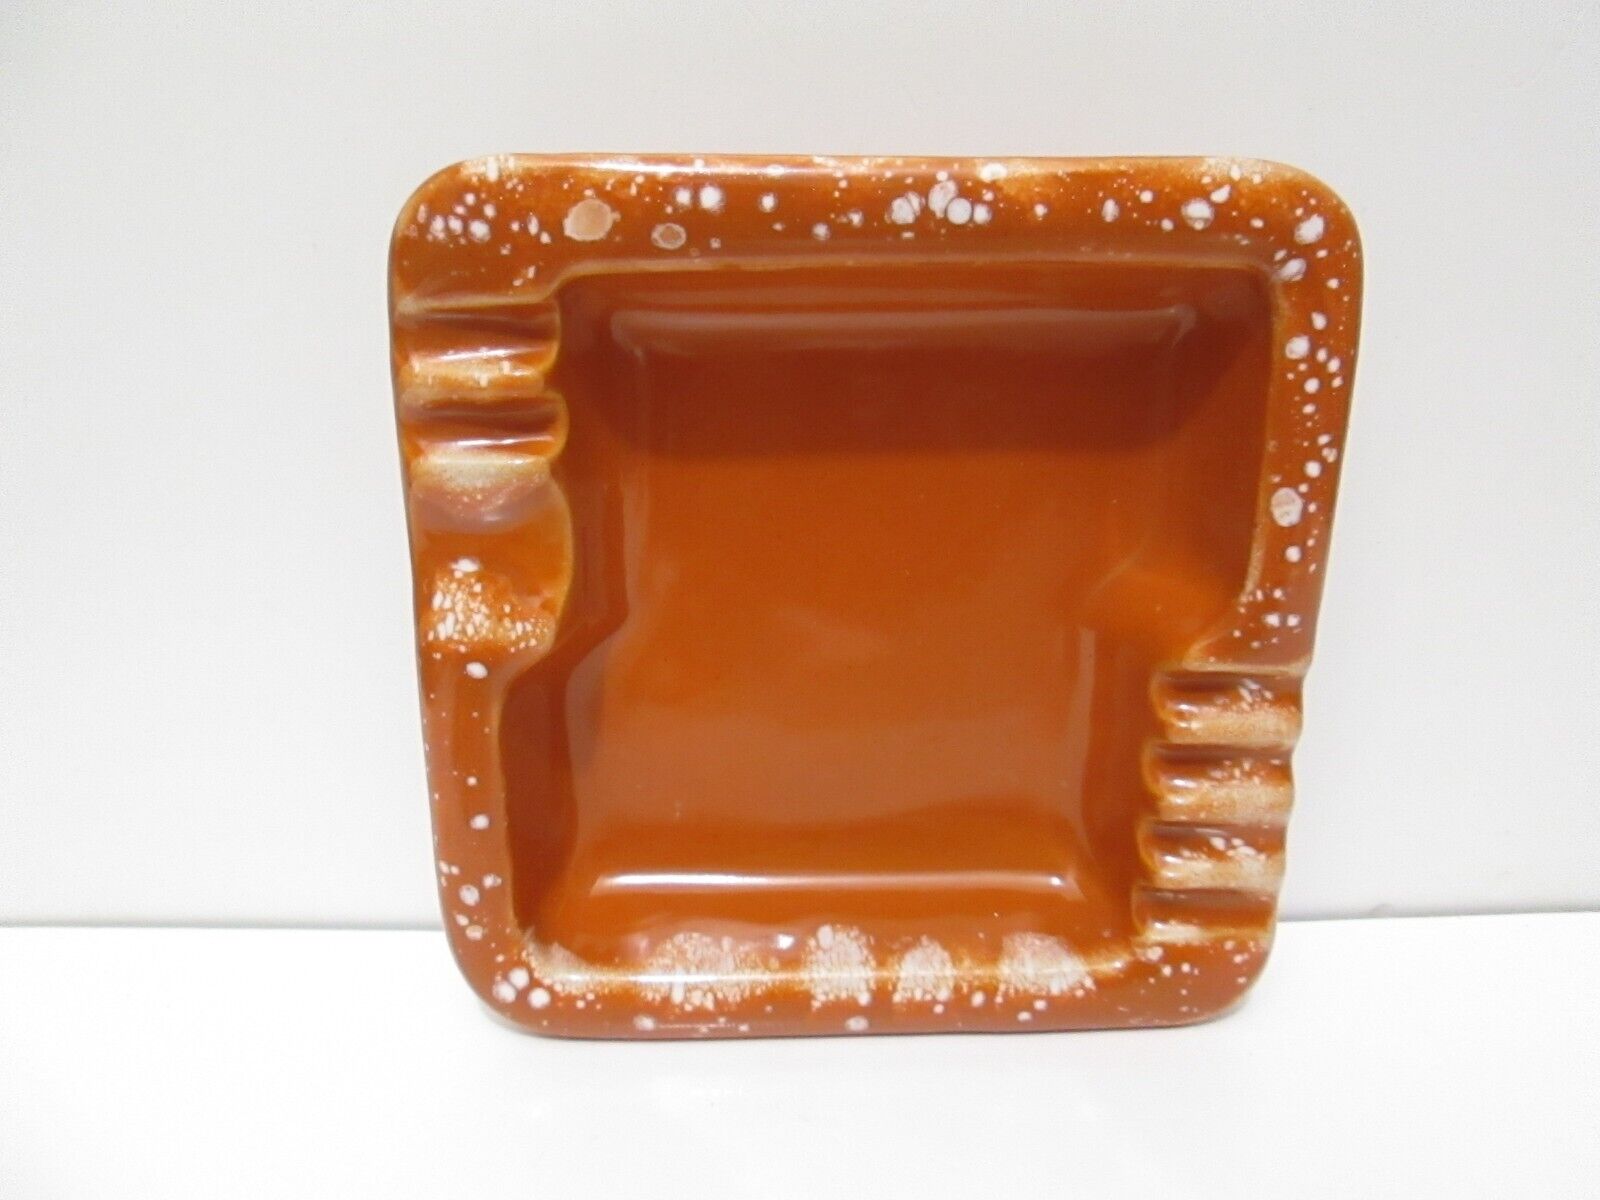 VTG POTTERY STYLE SQUARE ASHTRAY SPECKLED GLAZE MADE IN USA VGC